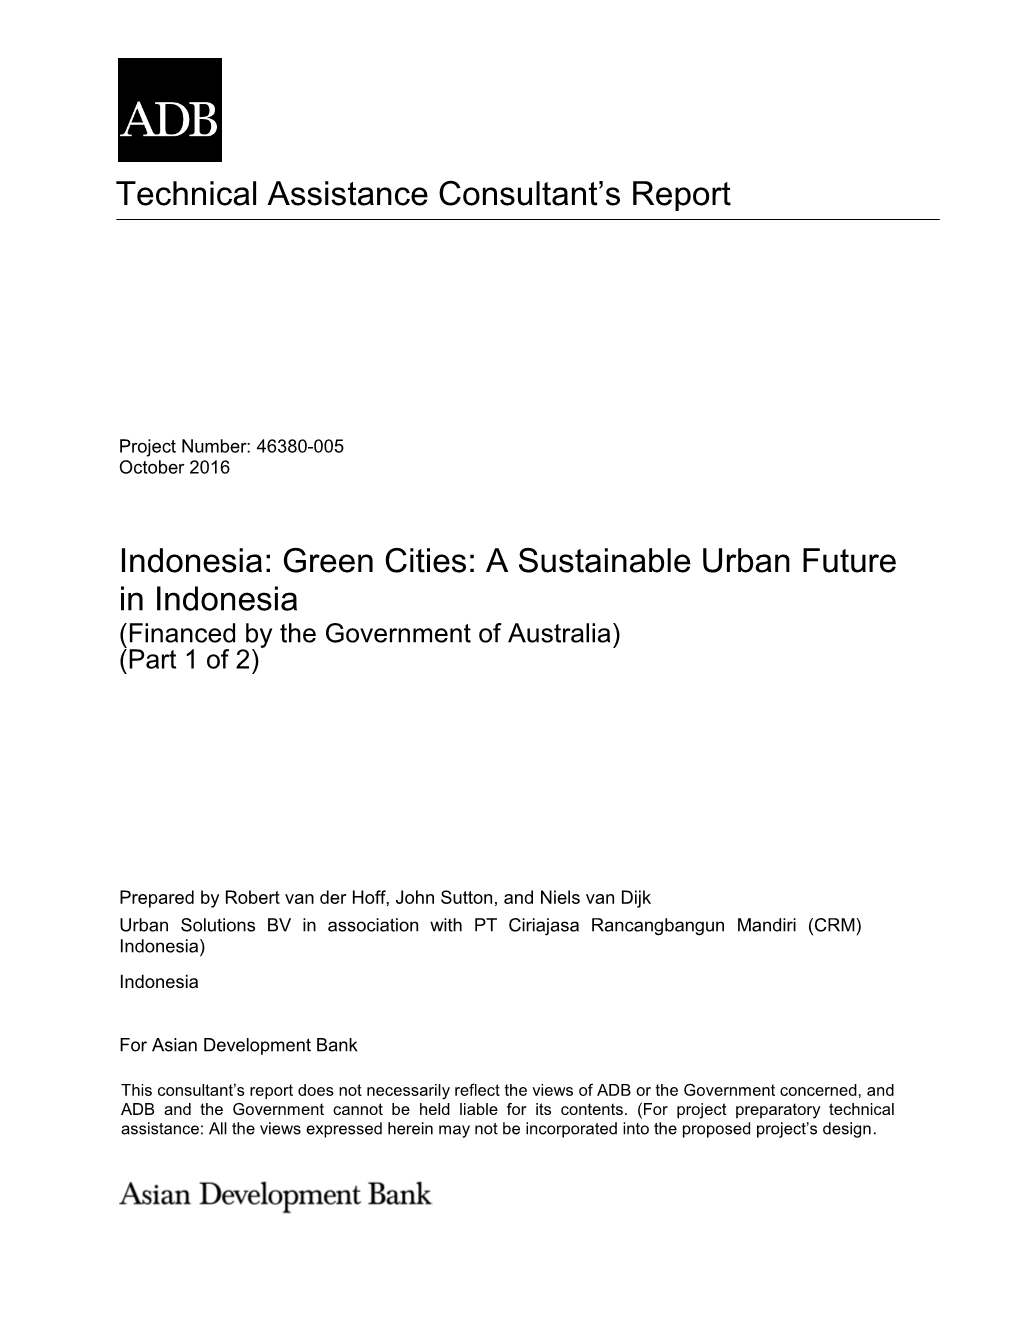 Green Cities: a Sustainable Urban Future in Indonesia (Financed by the Government of Australia) (Part 1 of 2)